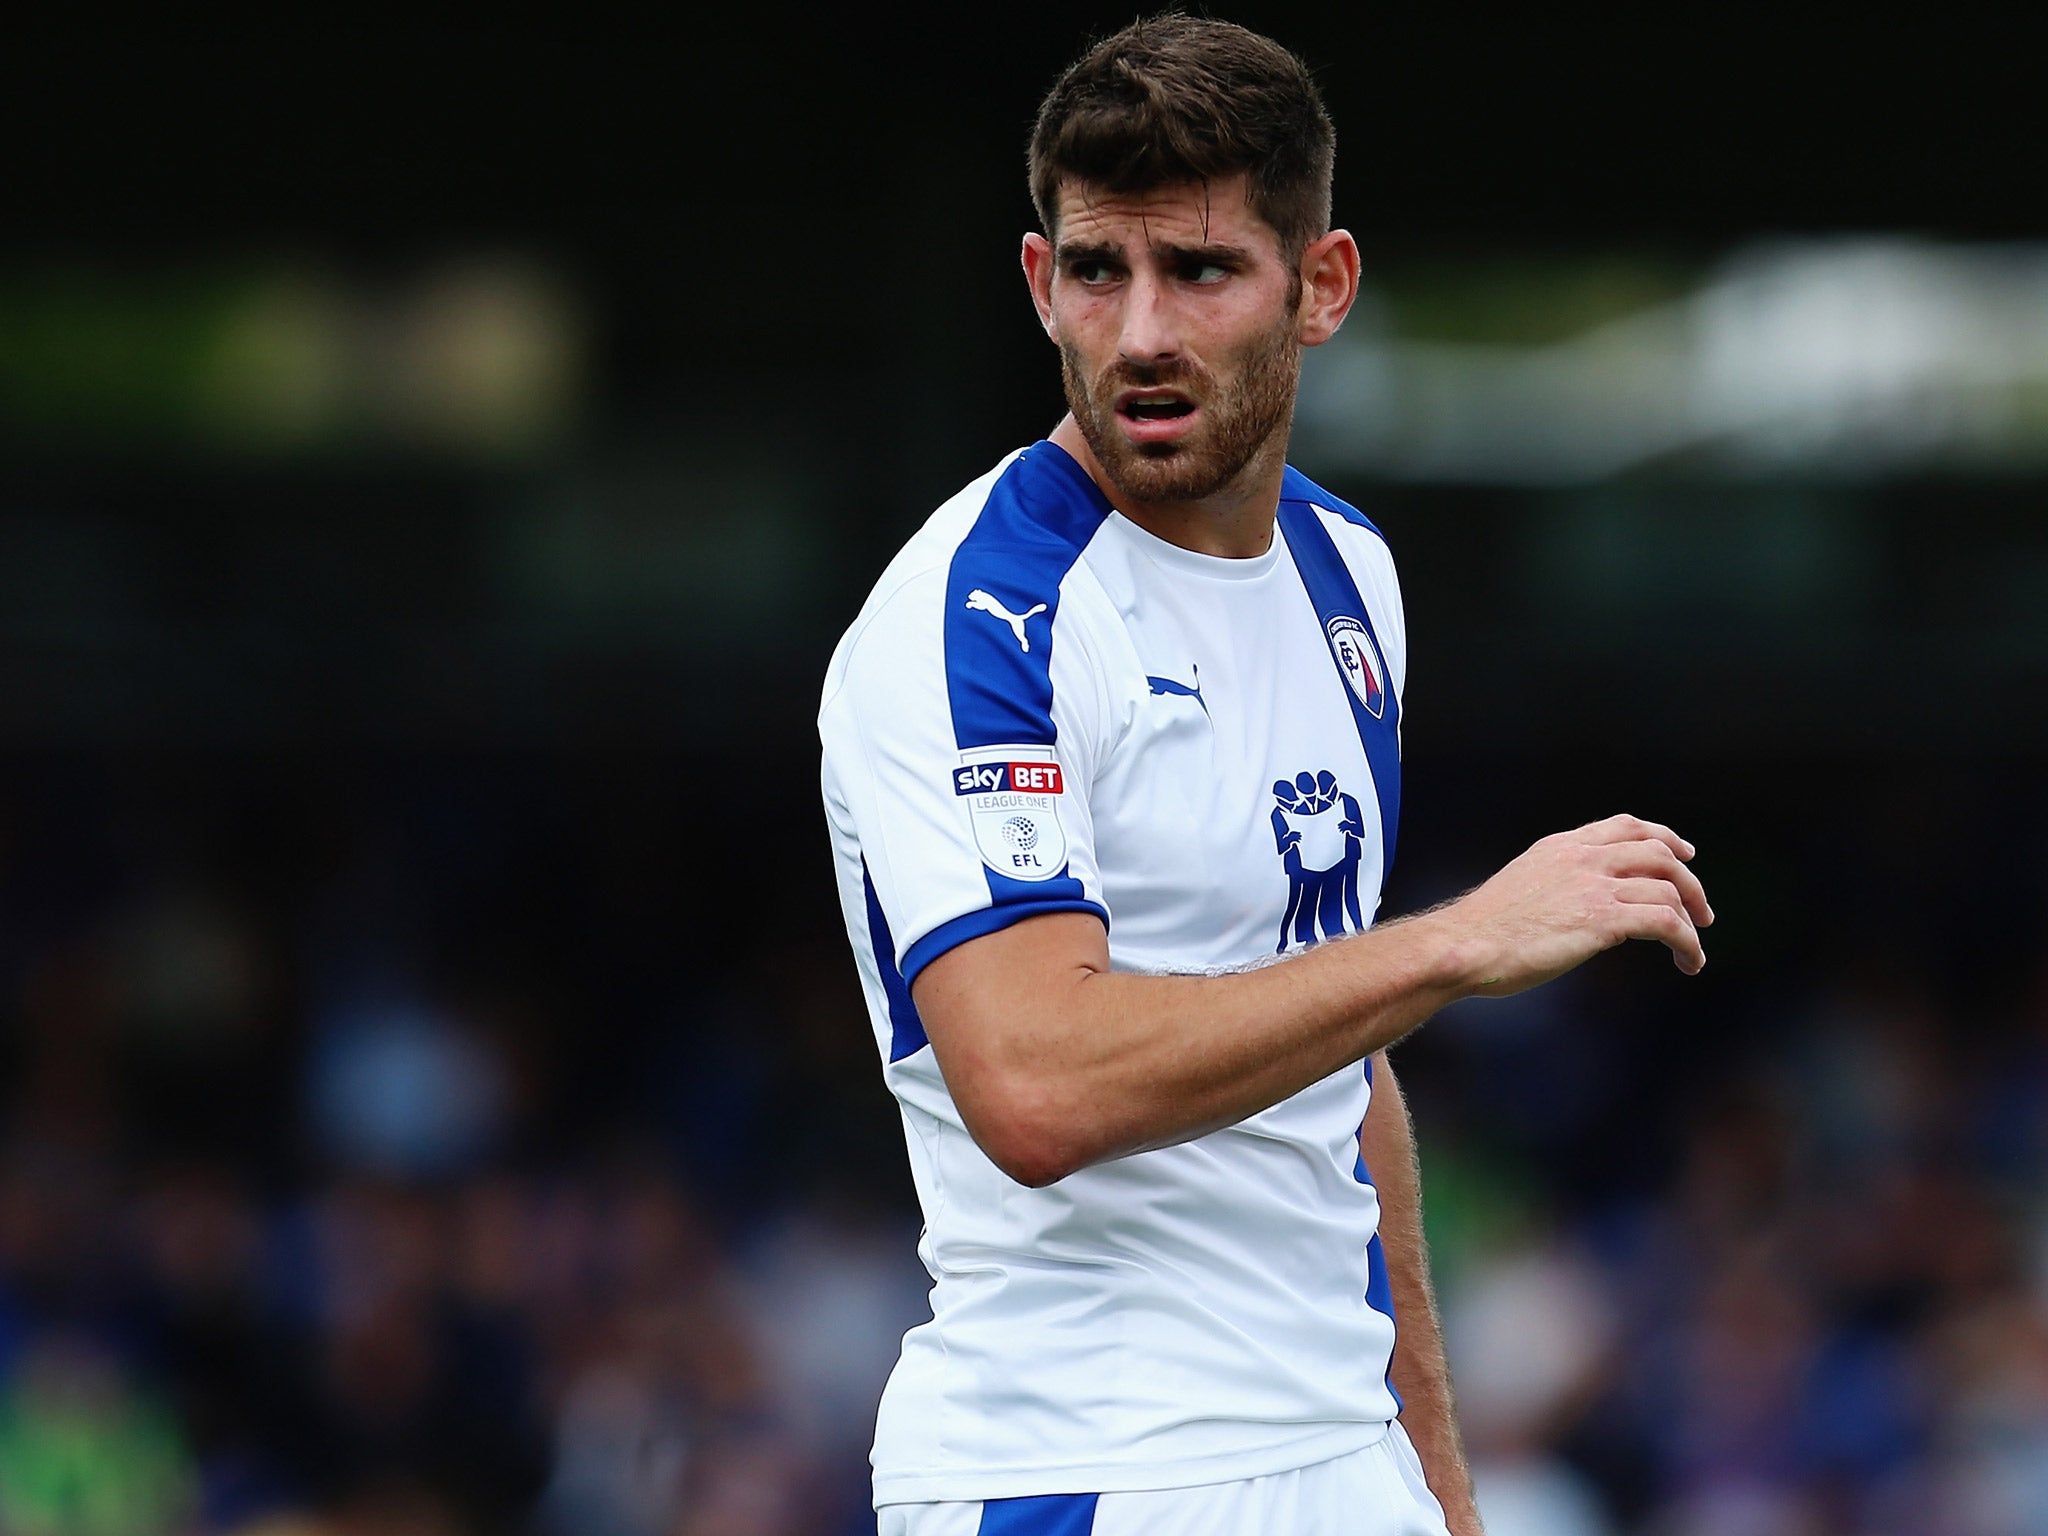 Ched Evans re-signed with Sheffield United earlier this month